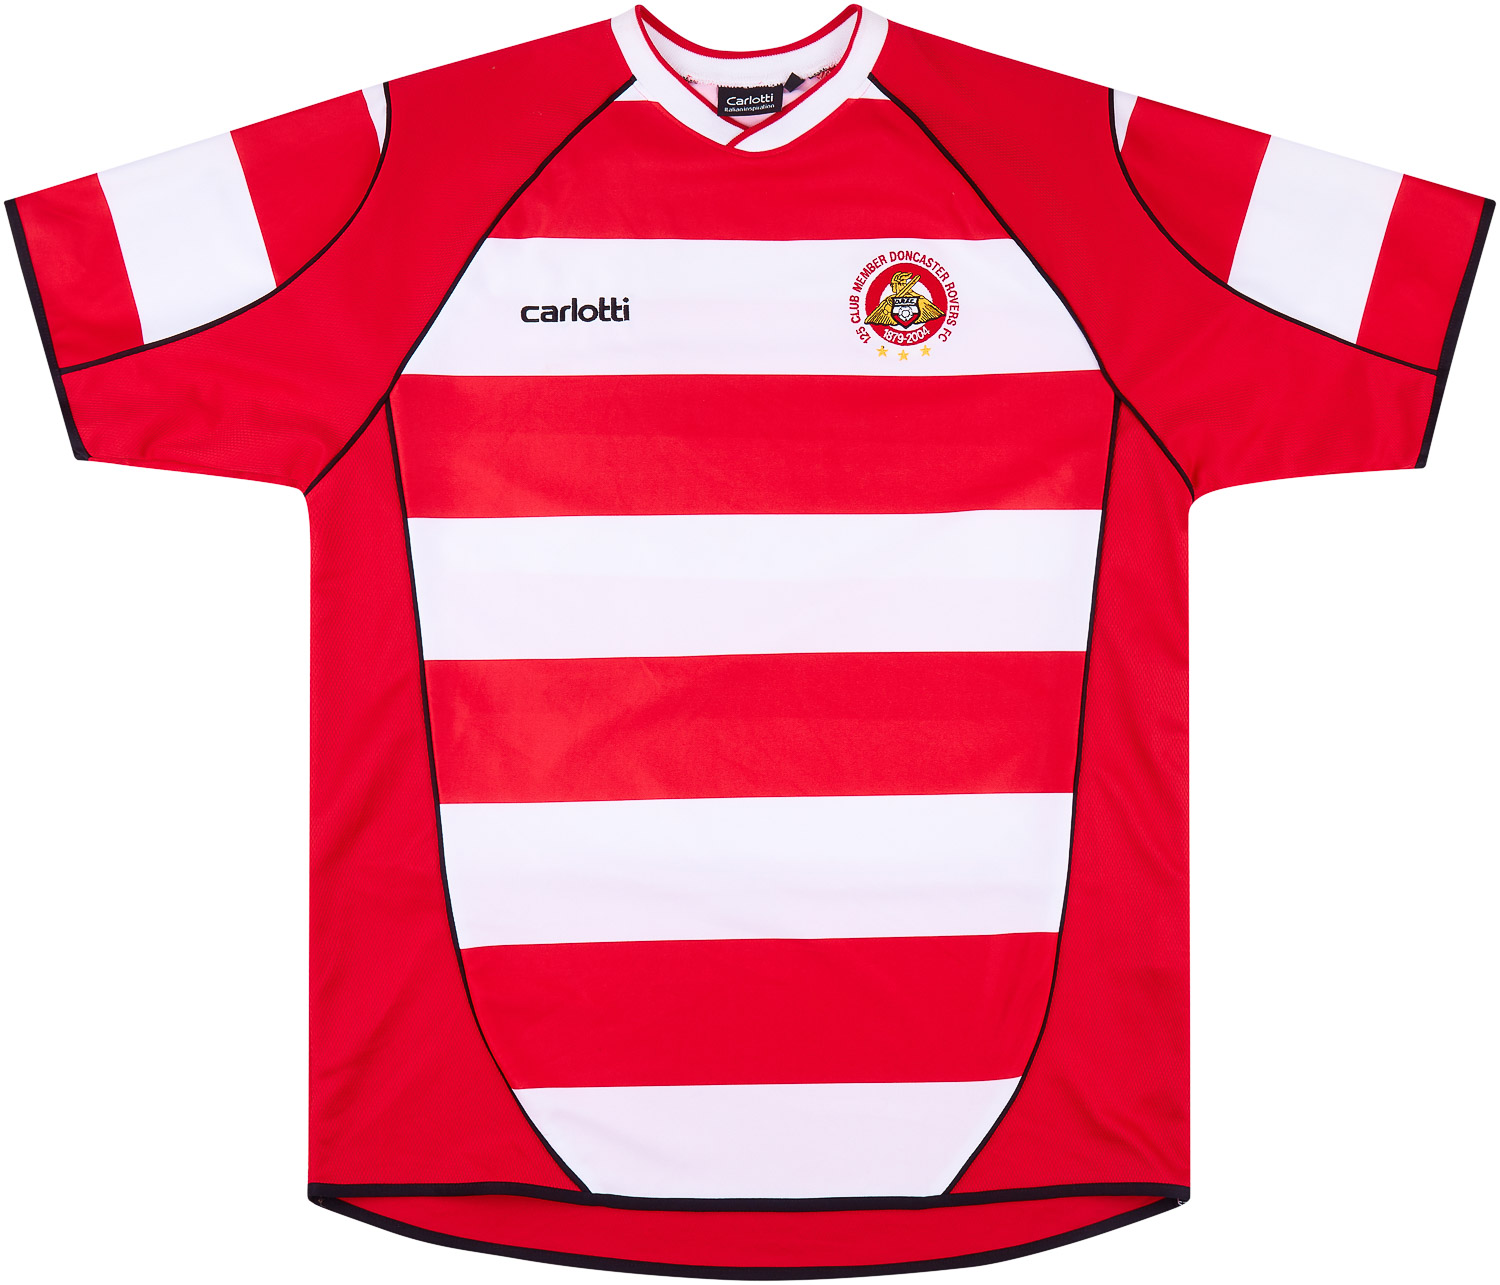 2003-05 Doncaster Rovers 'Club Member' Home Shirt - 9/10 - ()